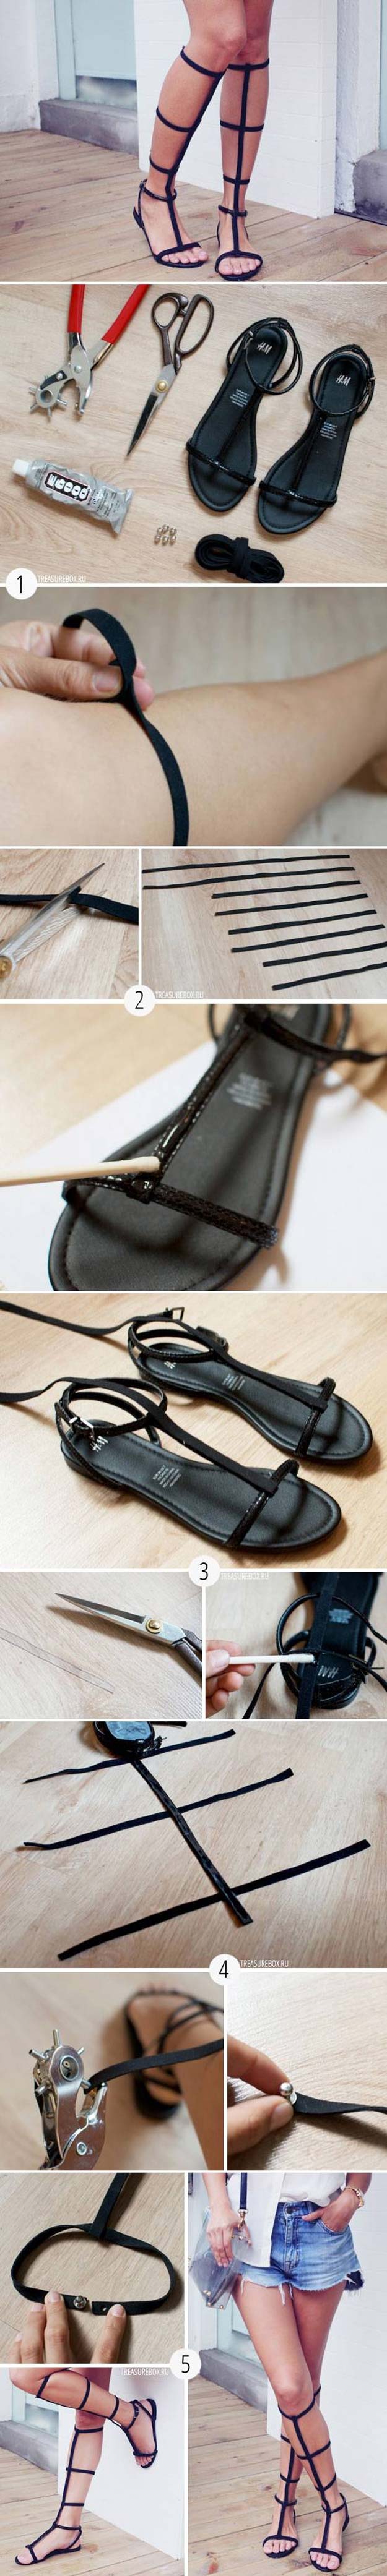 DIY Sandals and Flip Flops - DIY Nice Old Sandal Transformation - Creative, Cool and Easy Ways to Make or Update Your Shoes - Decorate Flip Flops with Cheap Dollar Store Crafts and Ideas - Beaded, Leather, Strappy and Painted Sandal Projects - Fun DIY Projects and Crafts for Teens and Teenagers 